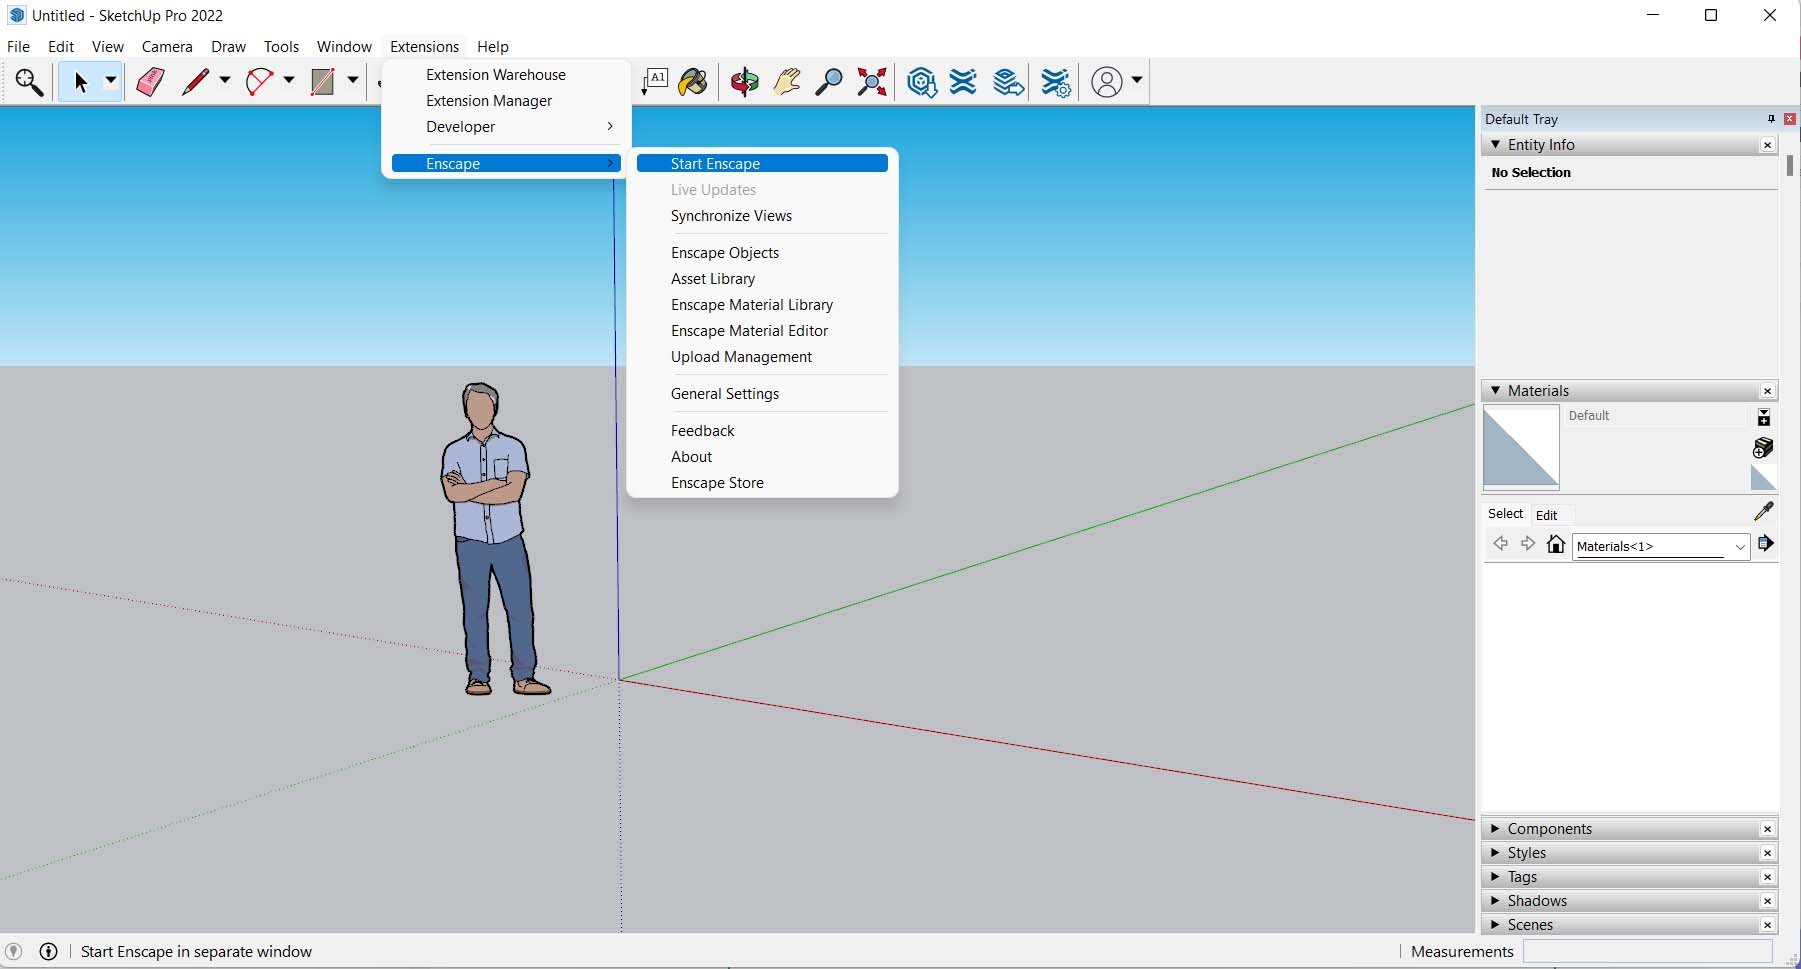 The Ultimate Guide to Getting Started With Enscape for SketchUp